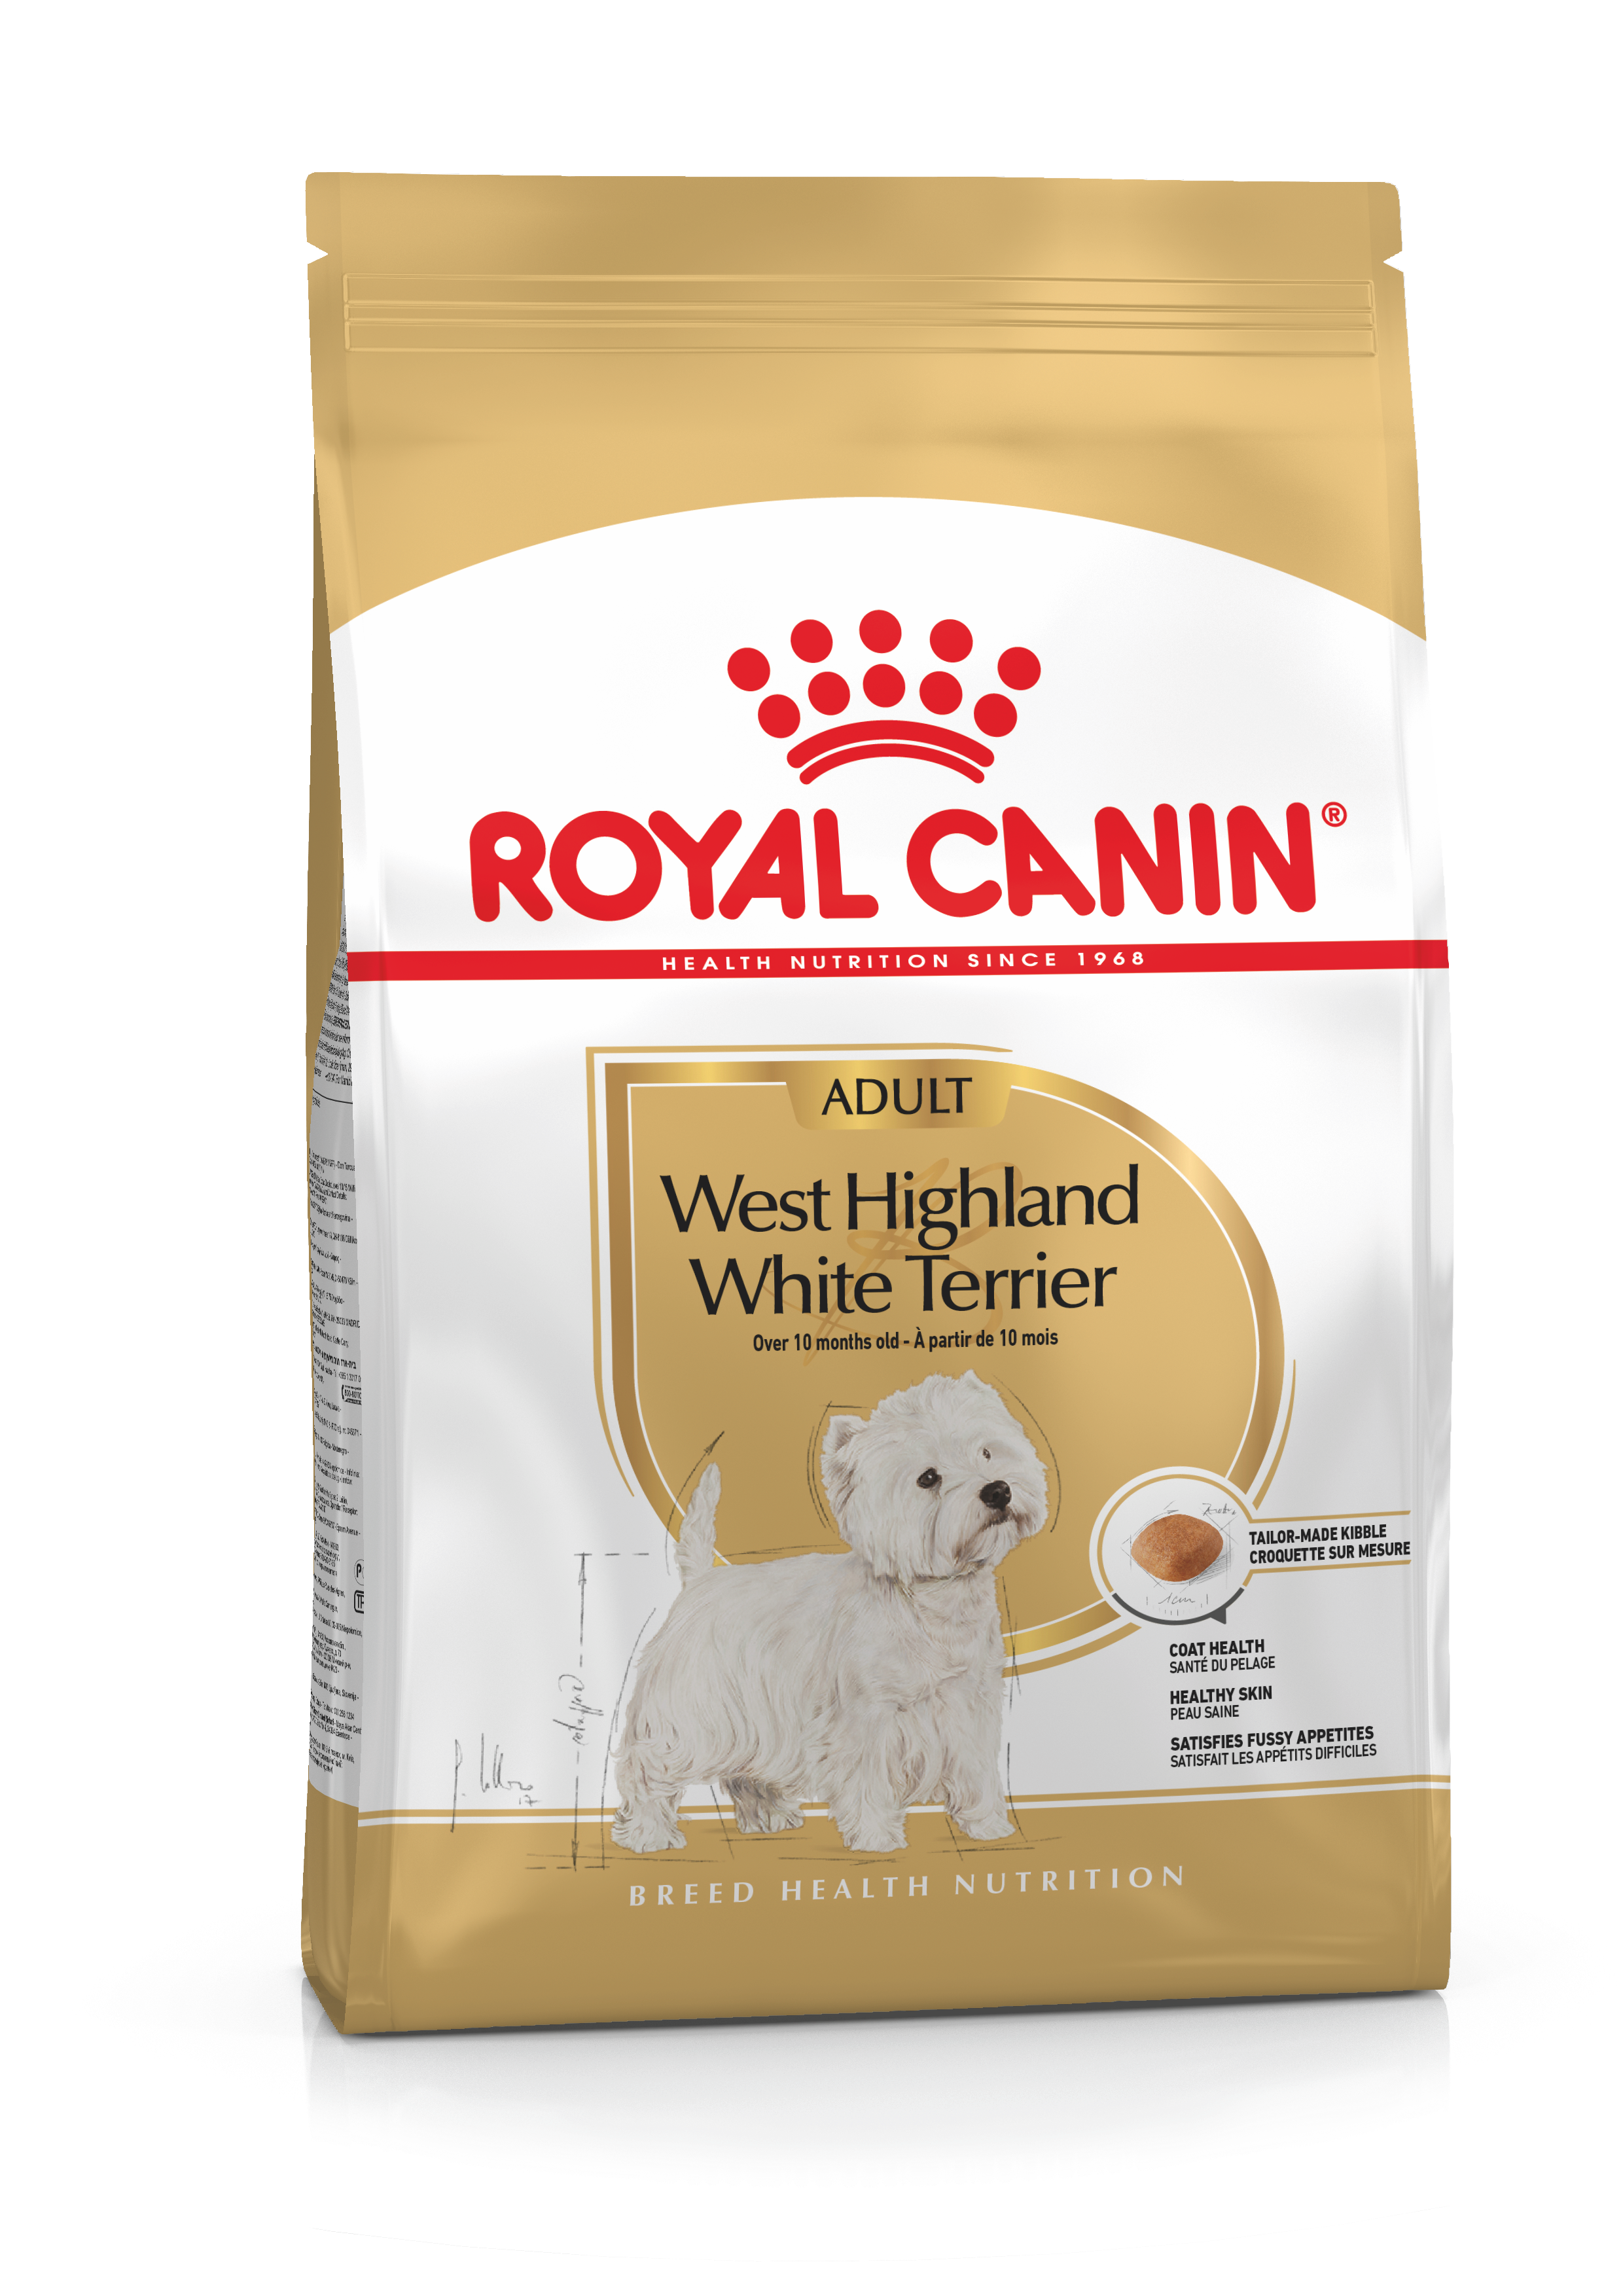 Royal Canin Wes Highland wihte